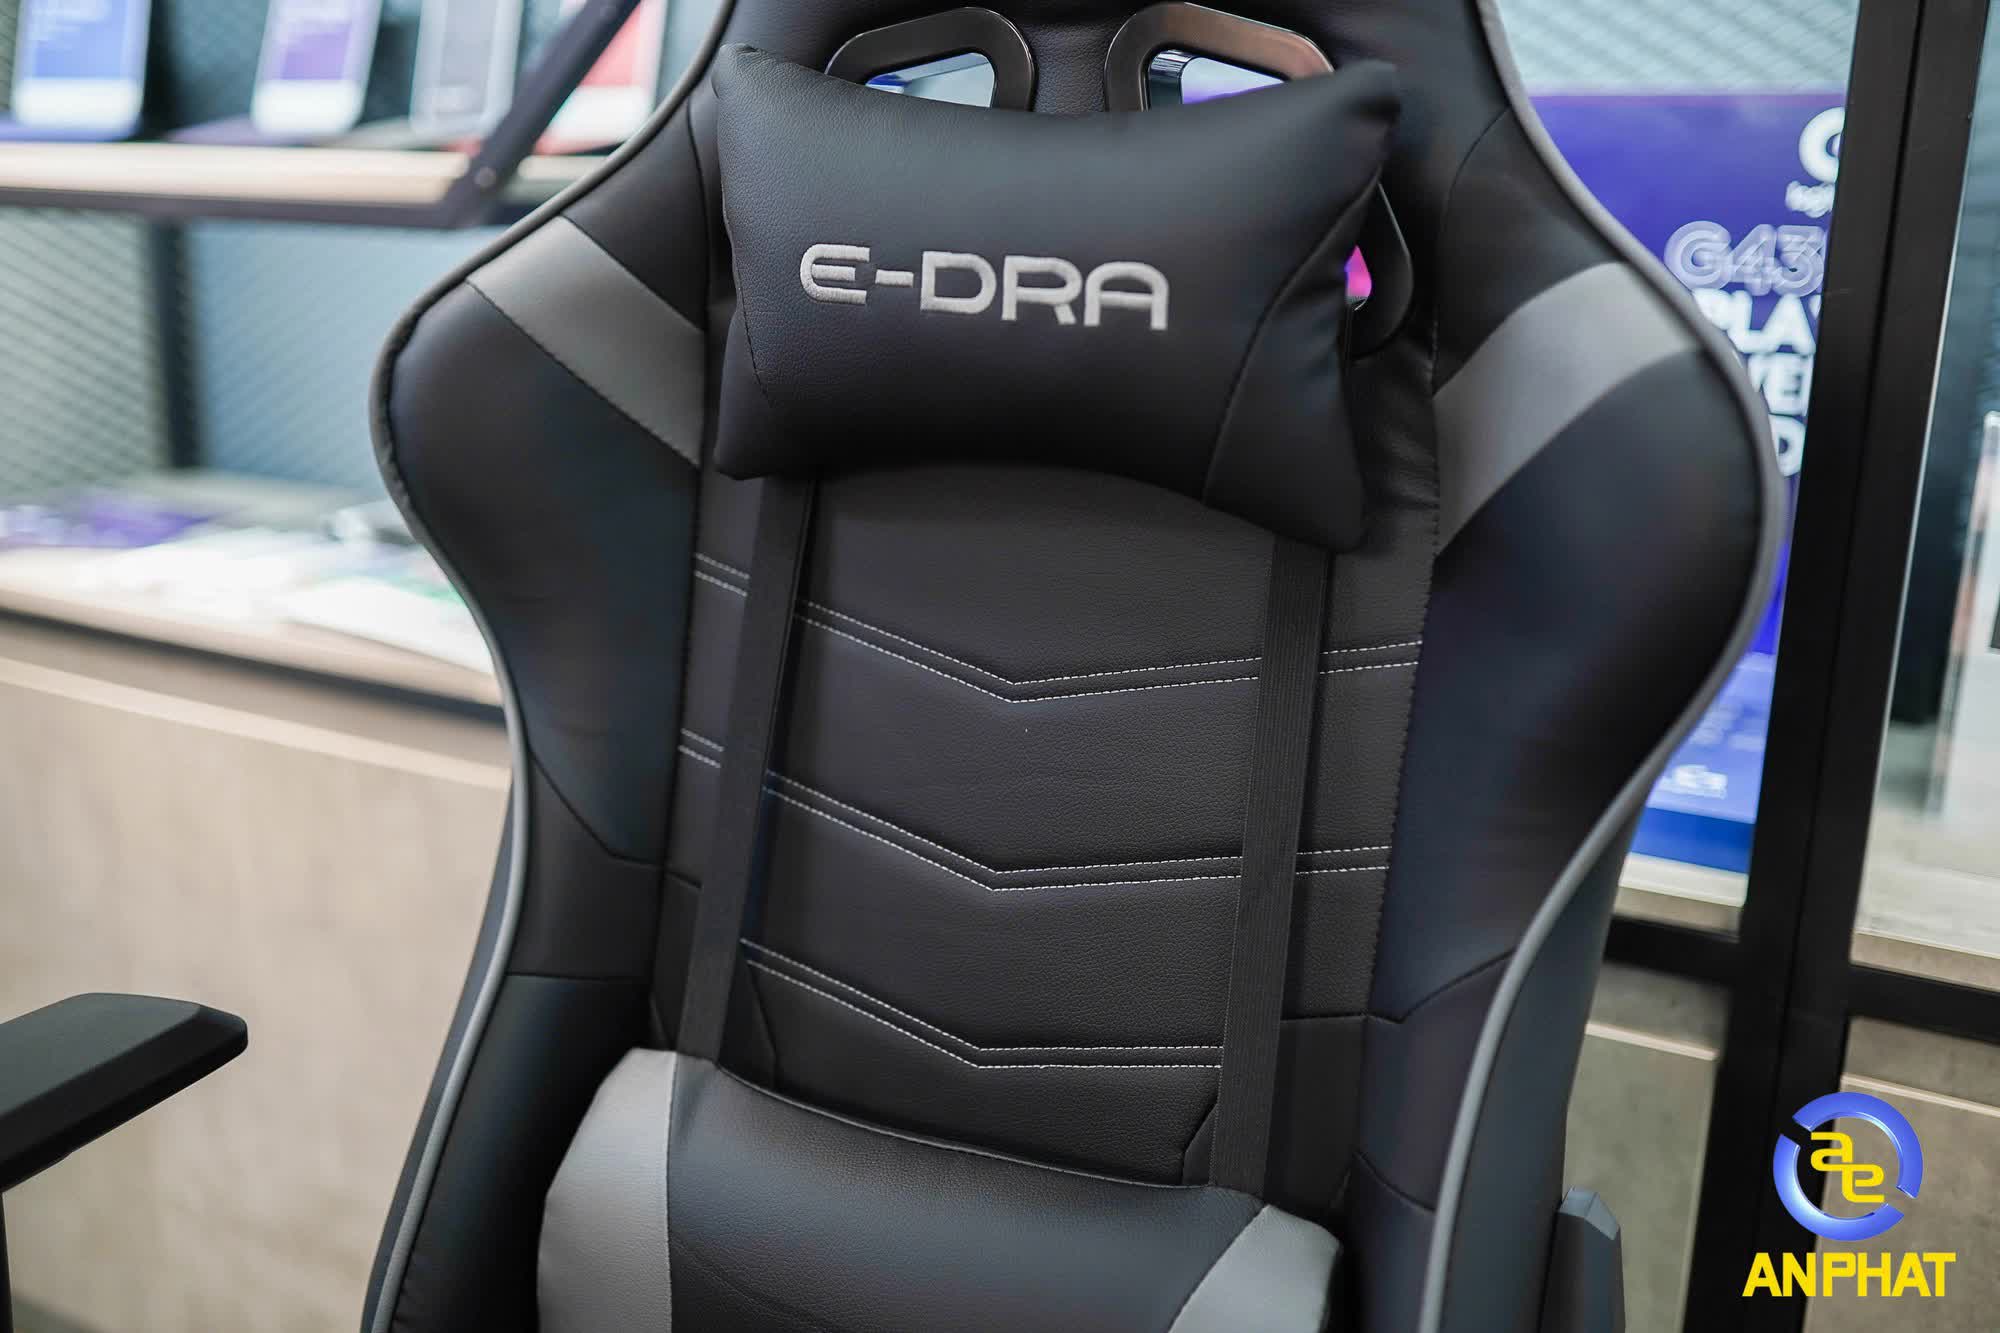 Find out E-Dra Level E EGC229, the conqueror of the gaming chair segment under 3 million - Photo 7.